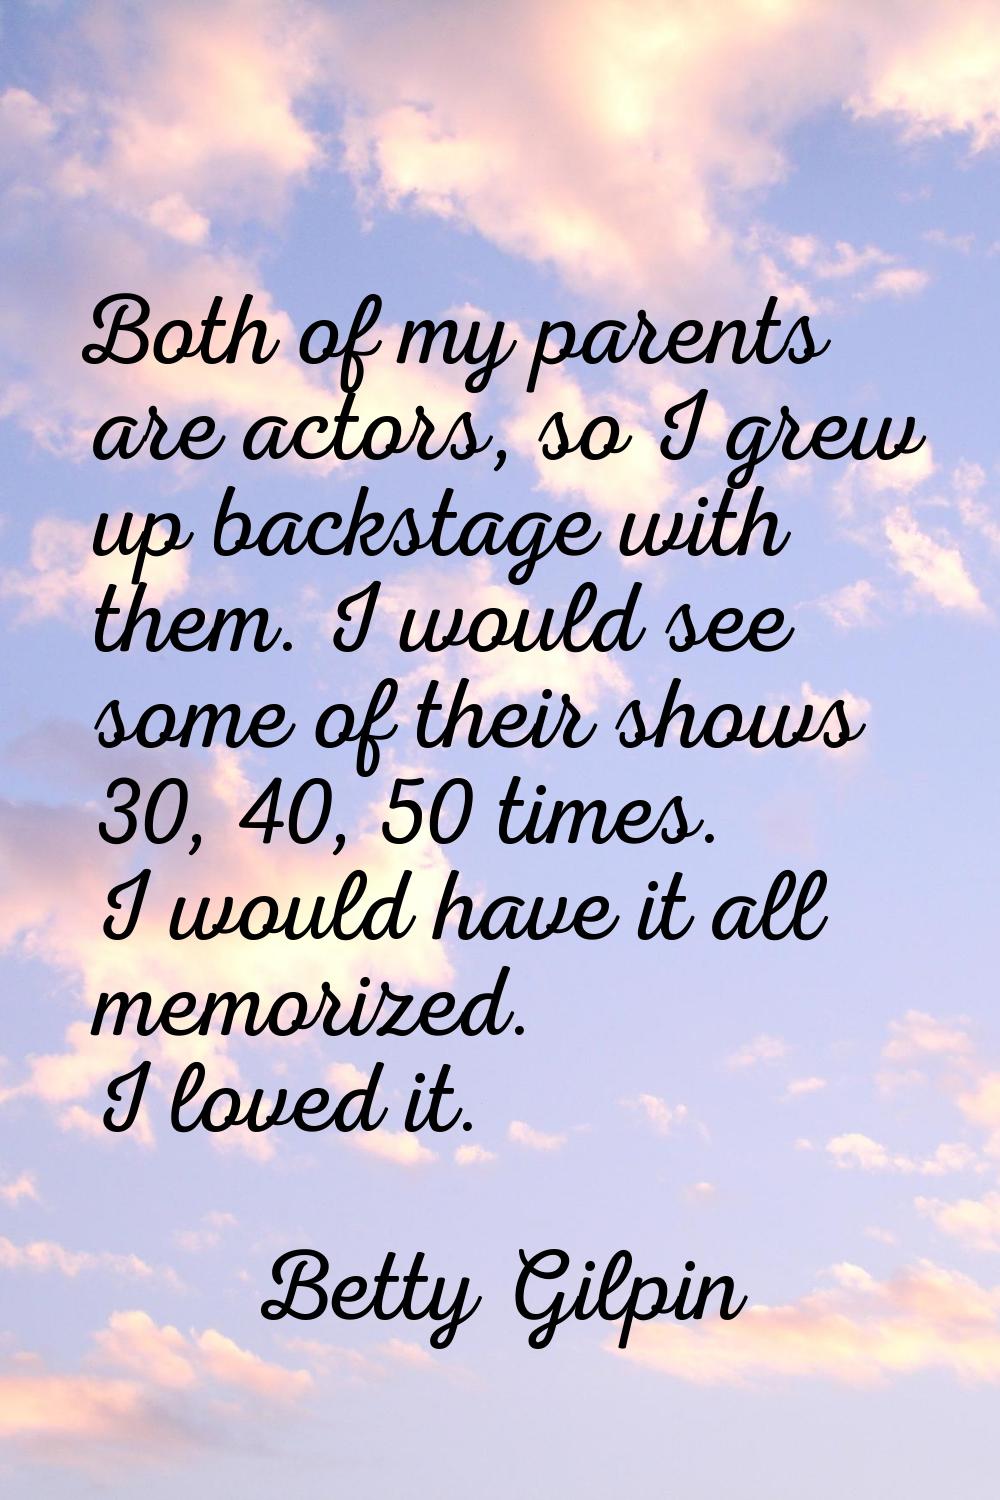 Both of my parents are actors, so I grew up backstage with them. I would see some of their shows 30